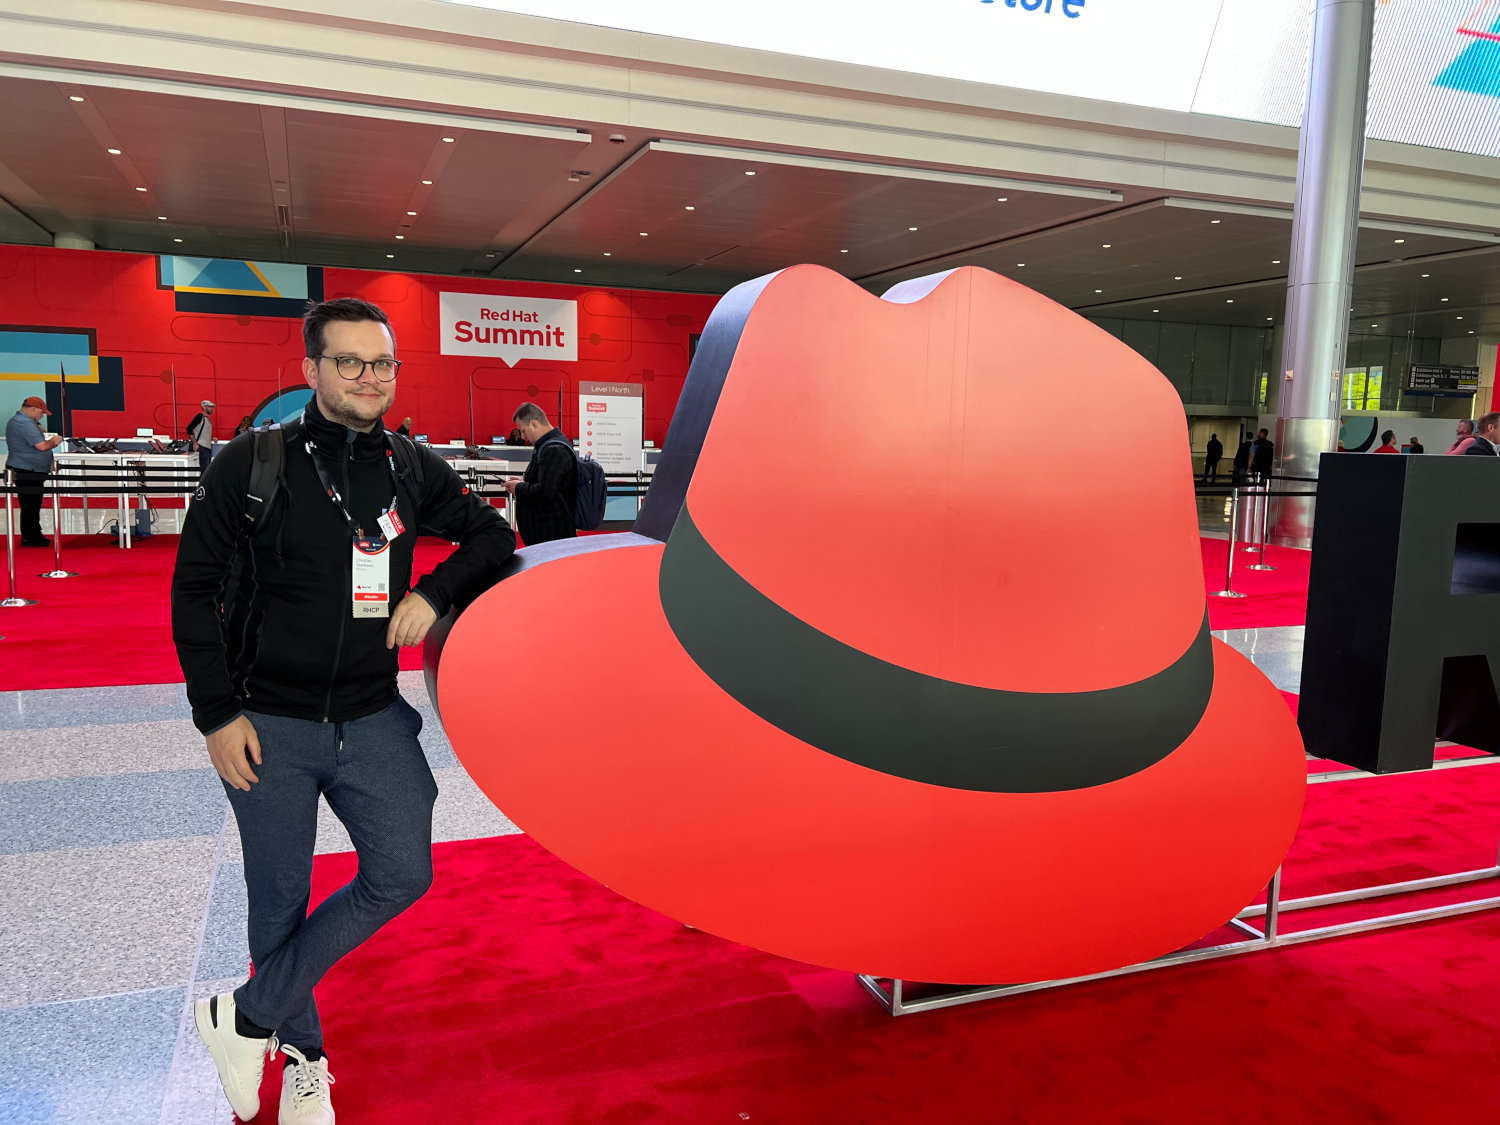 Me next to a large Red Hat logo